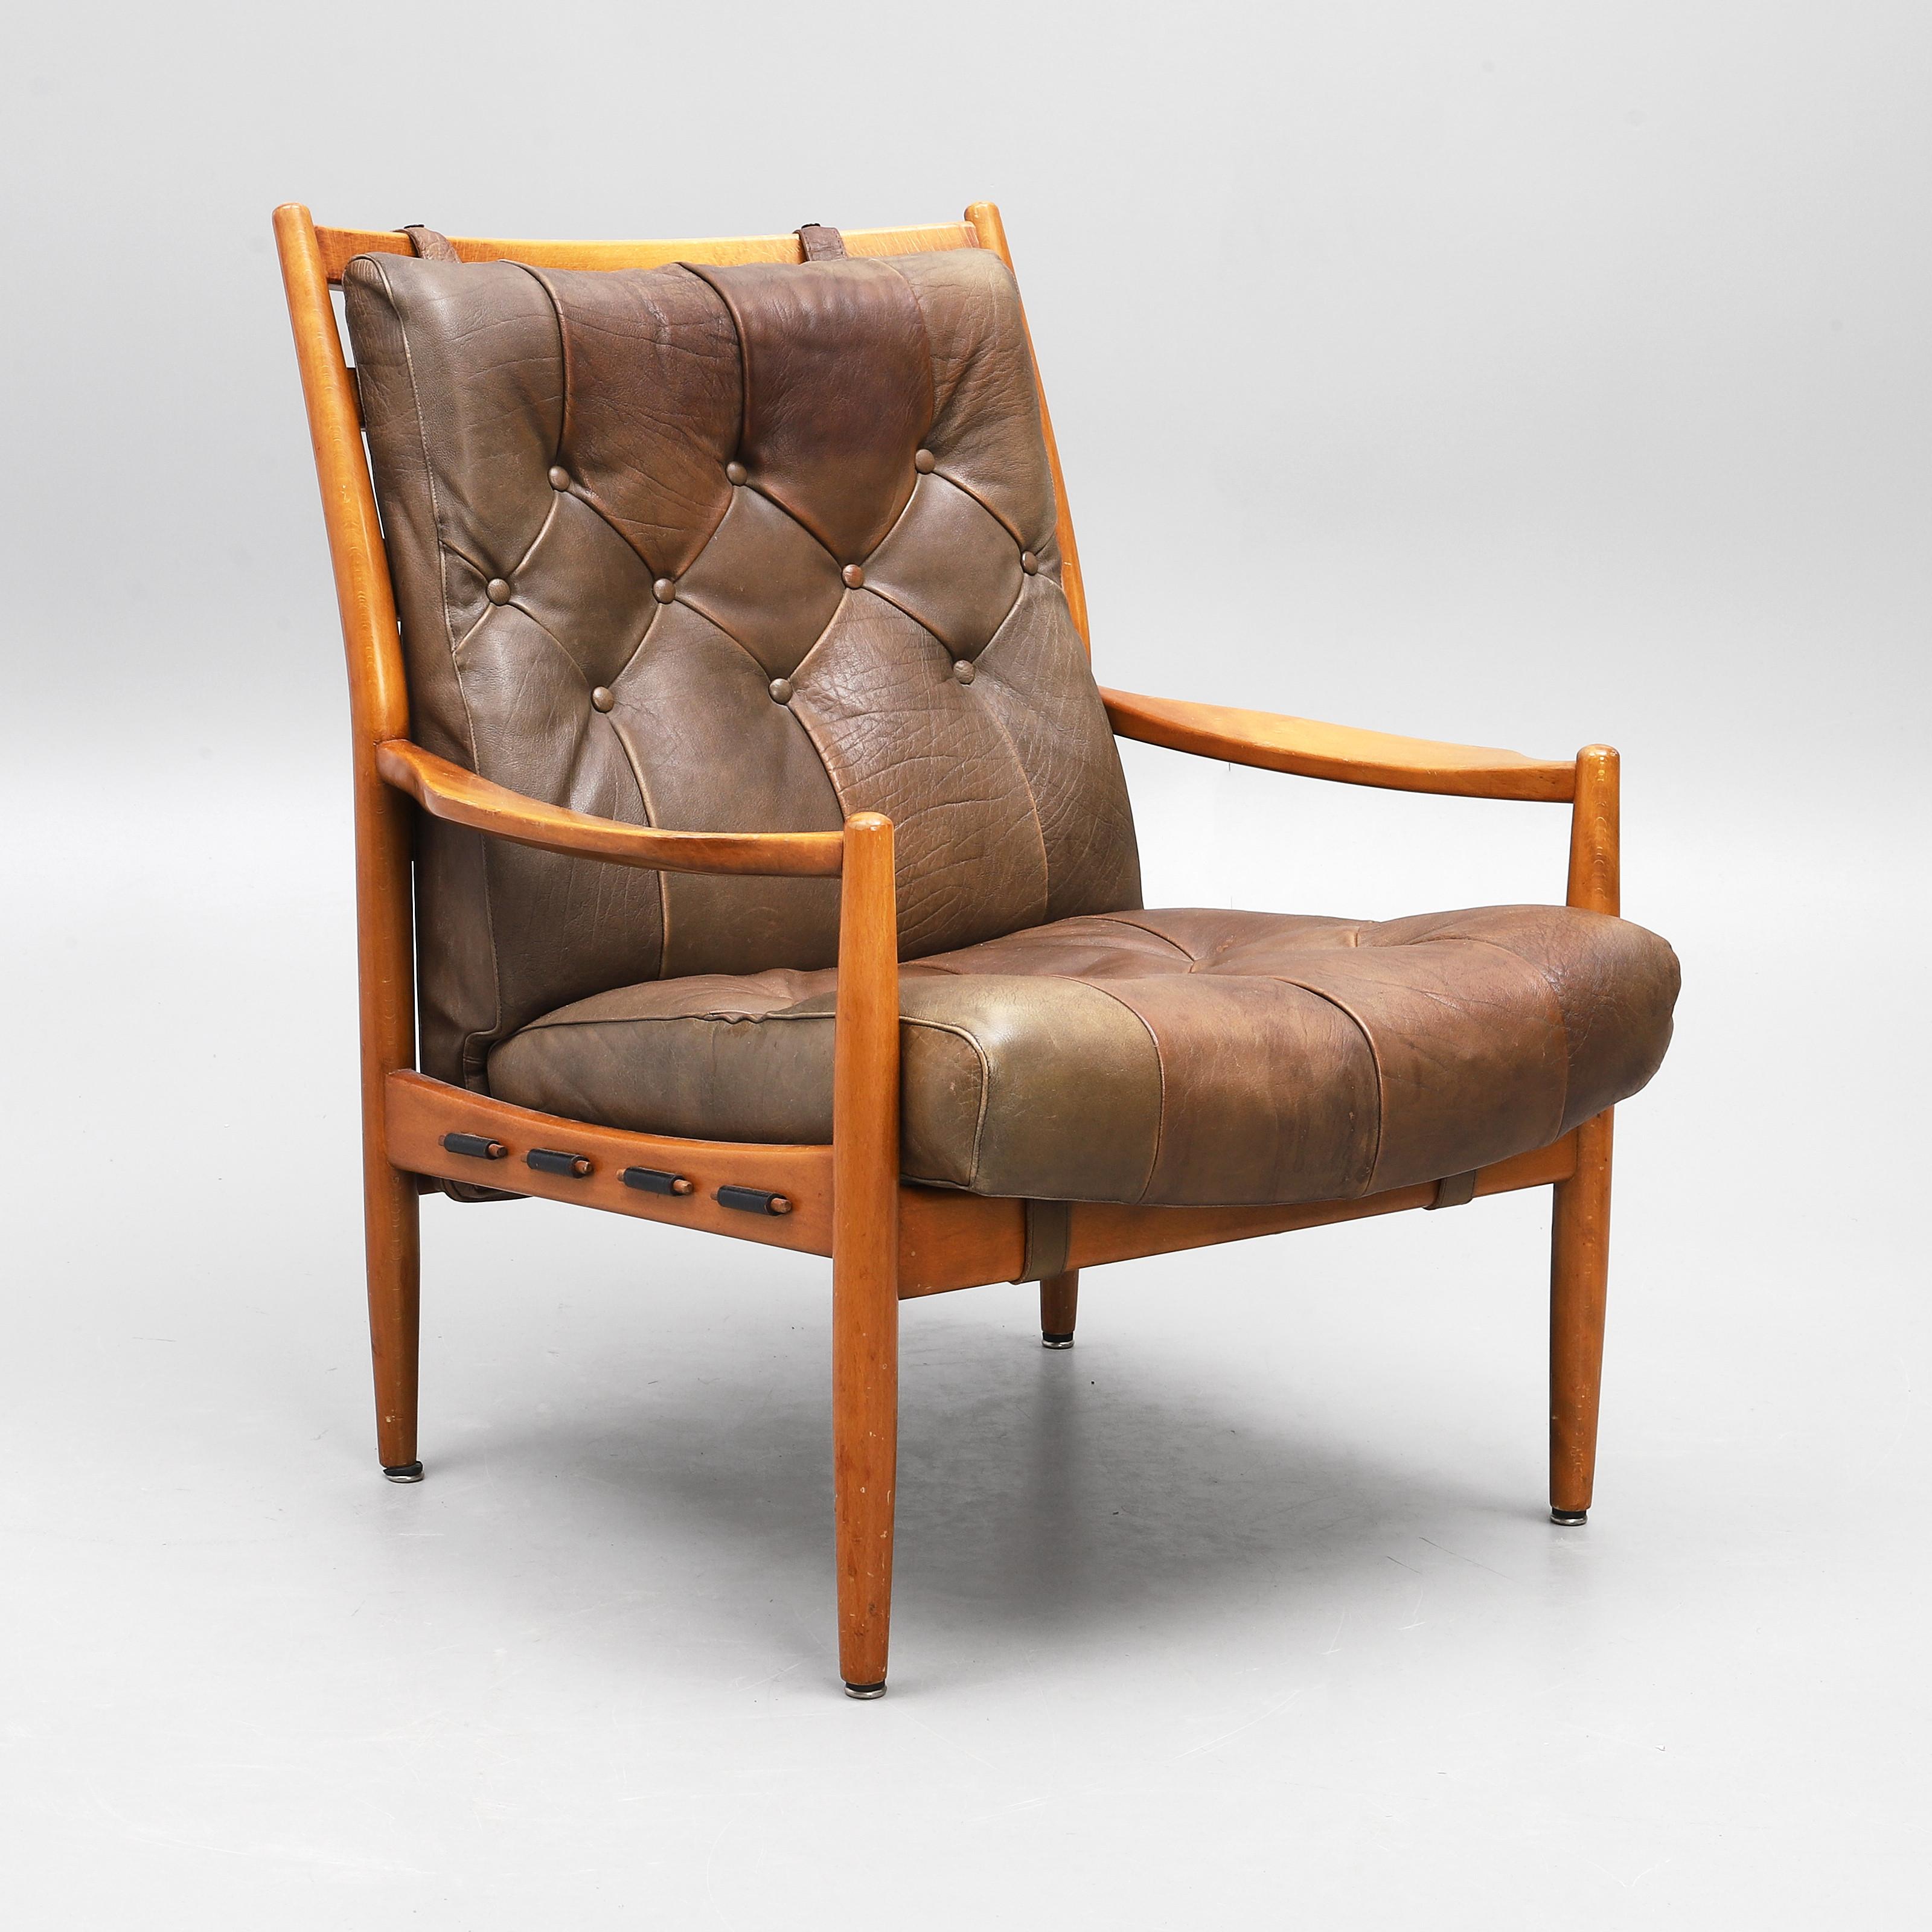 20th Century Ingemar Thillmark Lacko Armchair for OPE Mobler, Sweden, 1960 For Sale